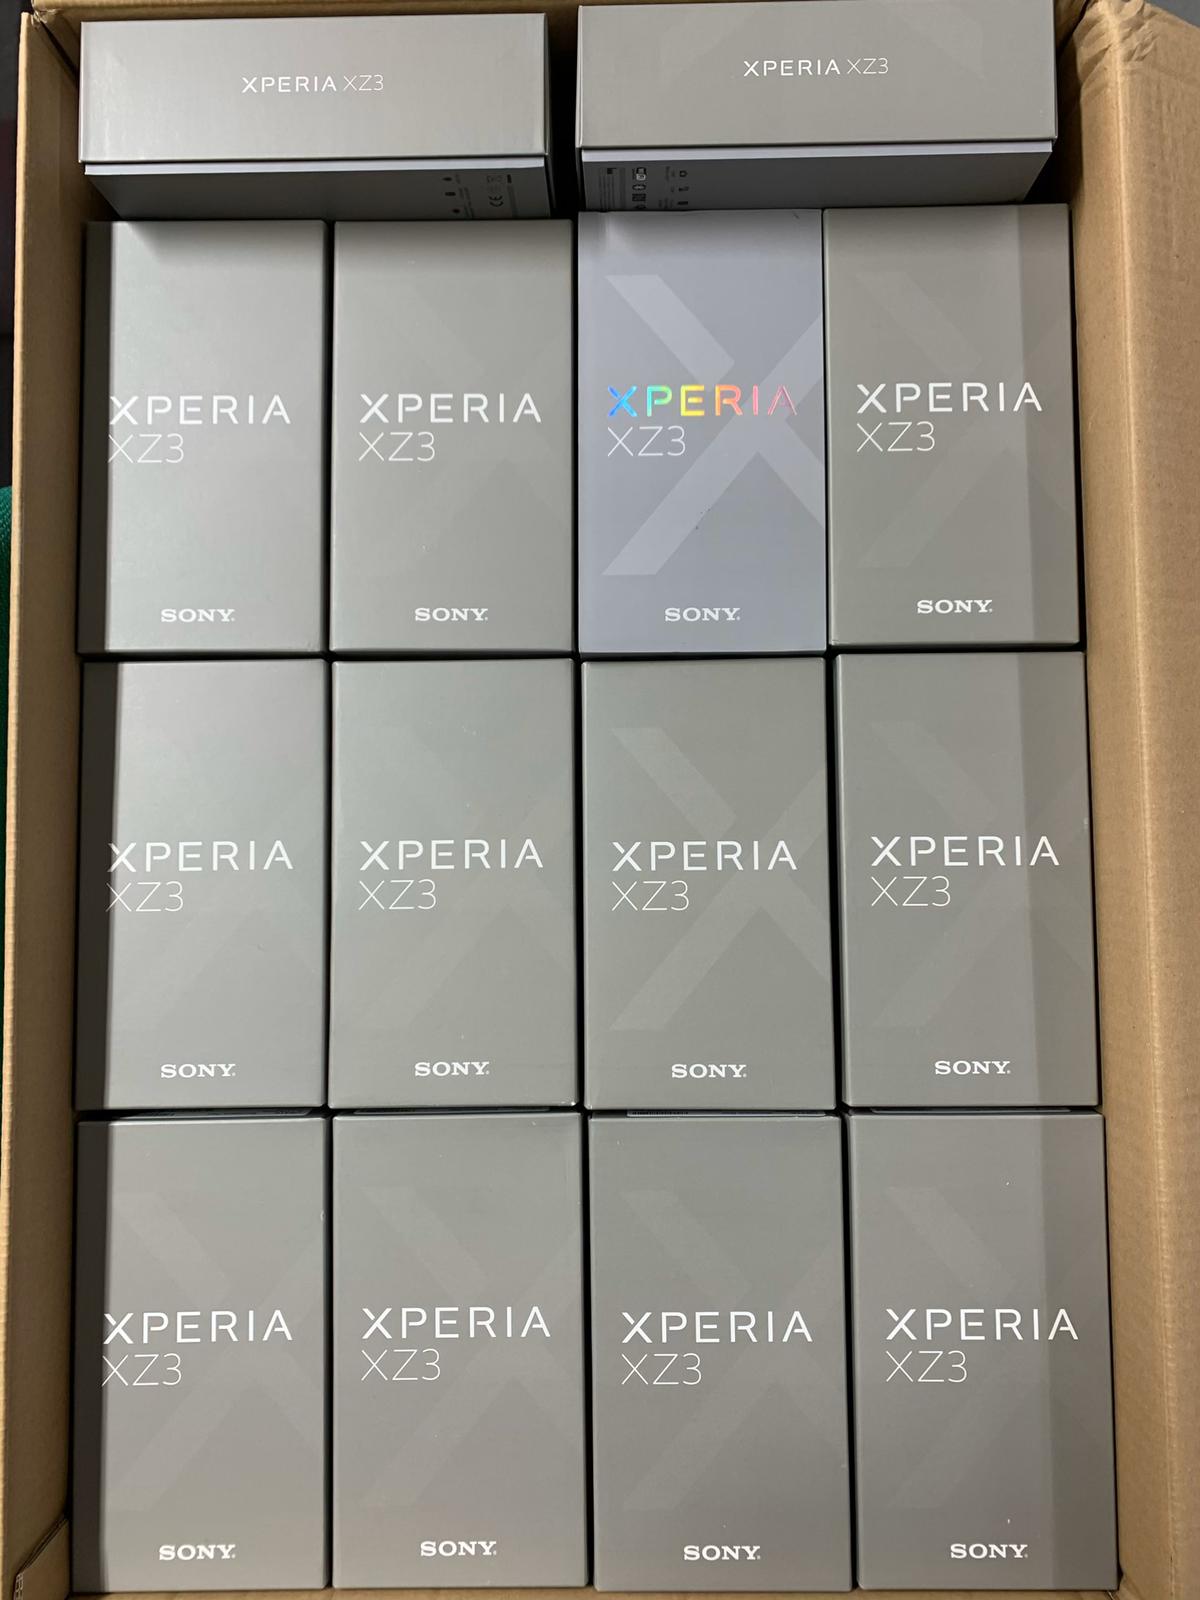 Sony Xperia XZ3 Handy Verpackung (80 Stk.)